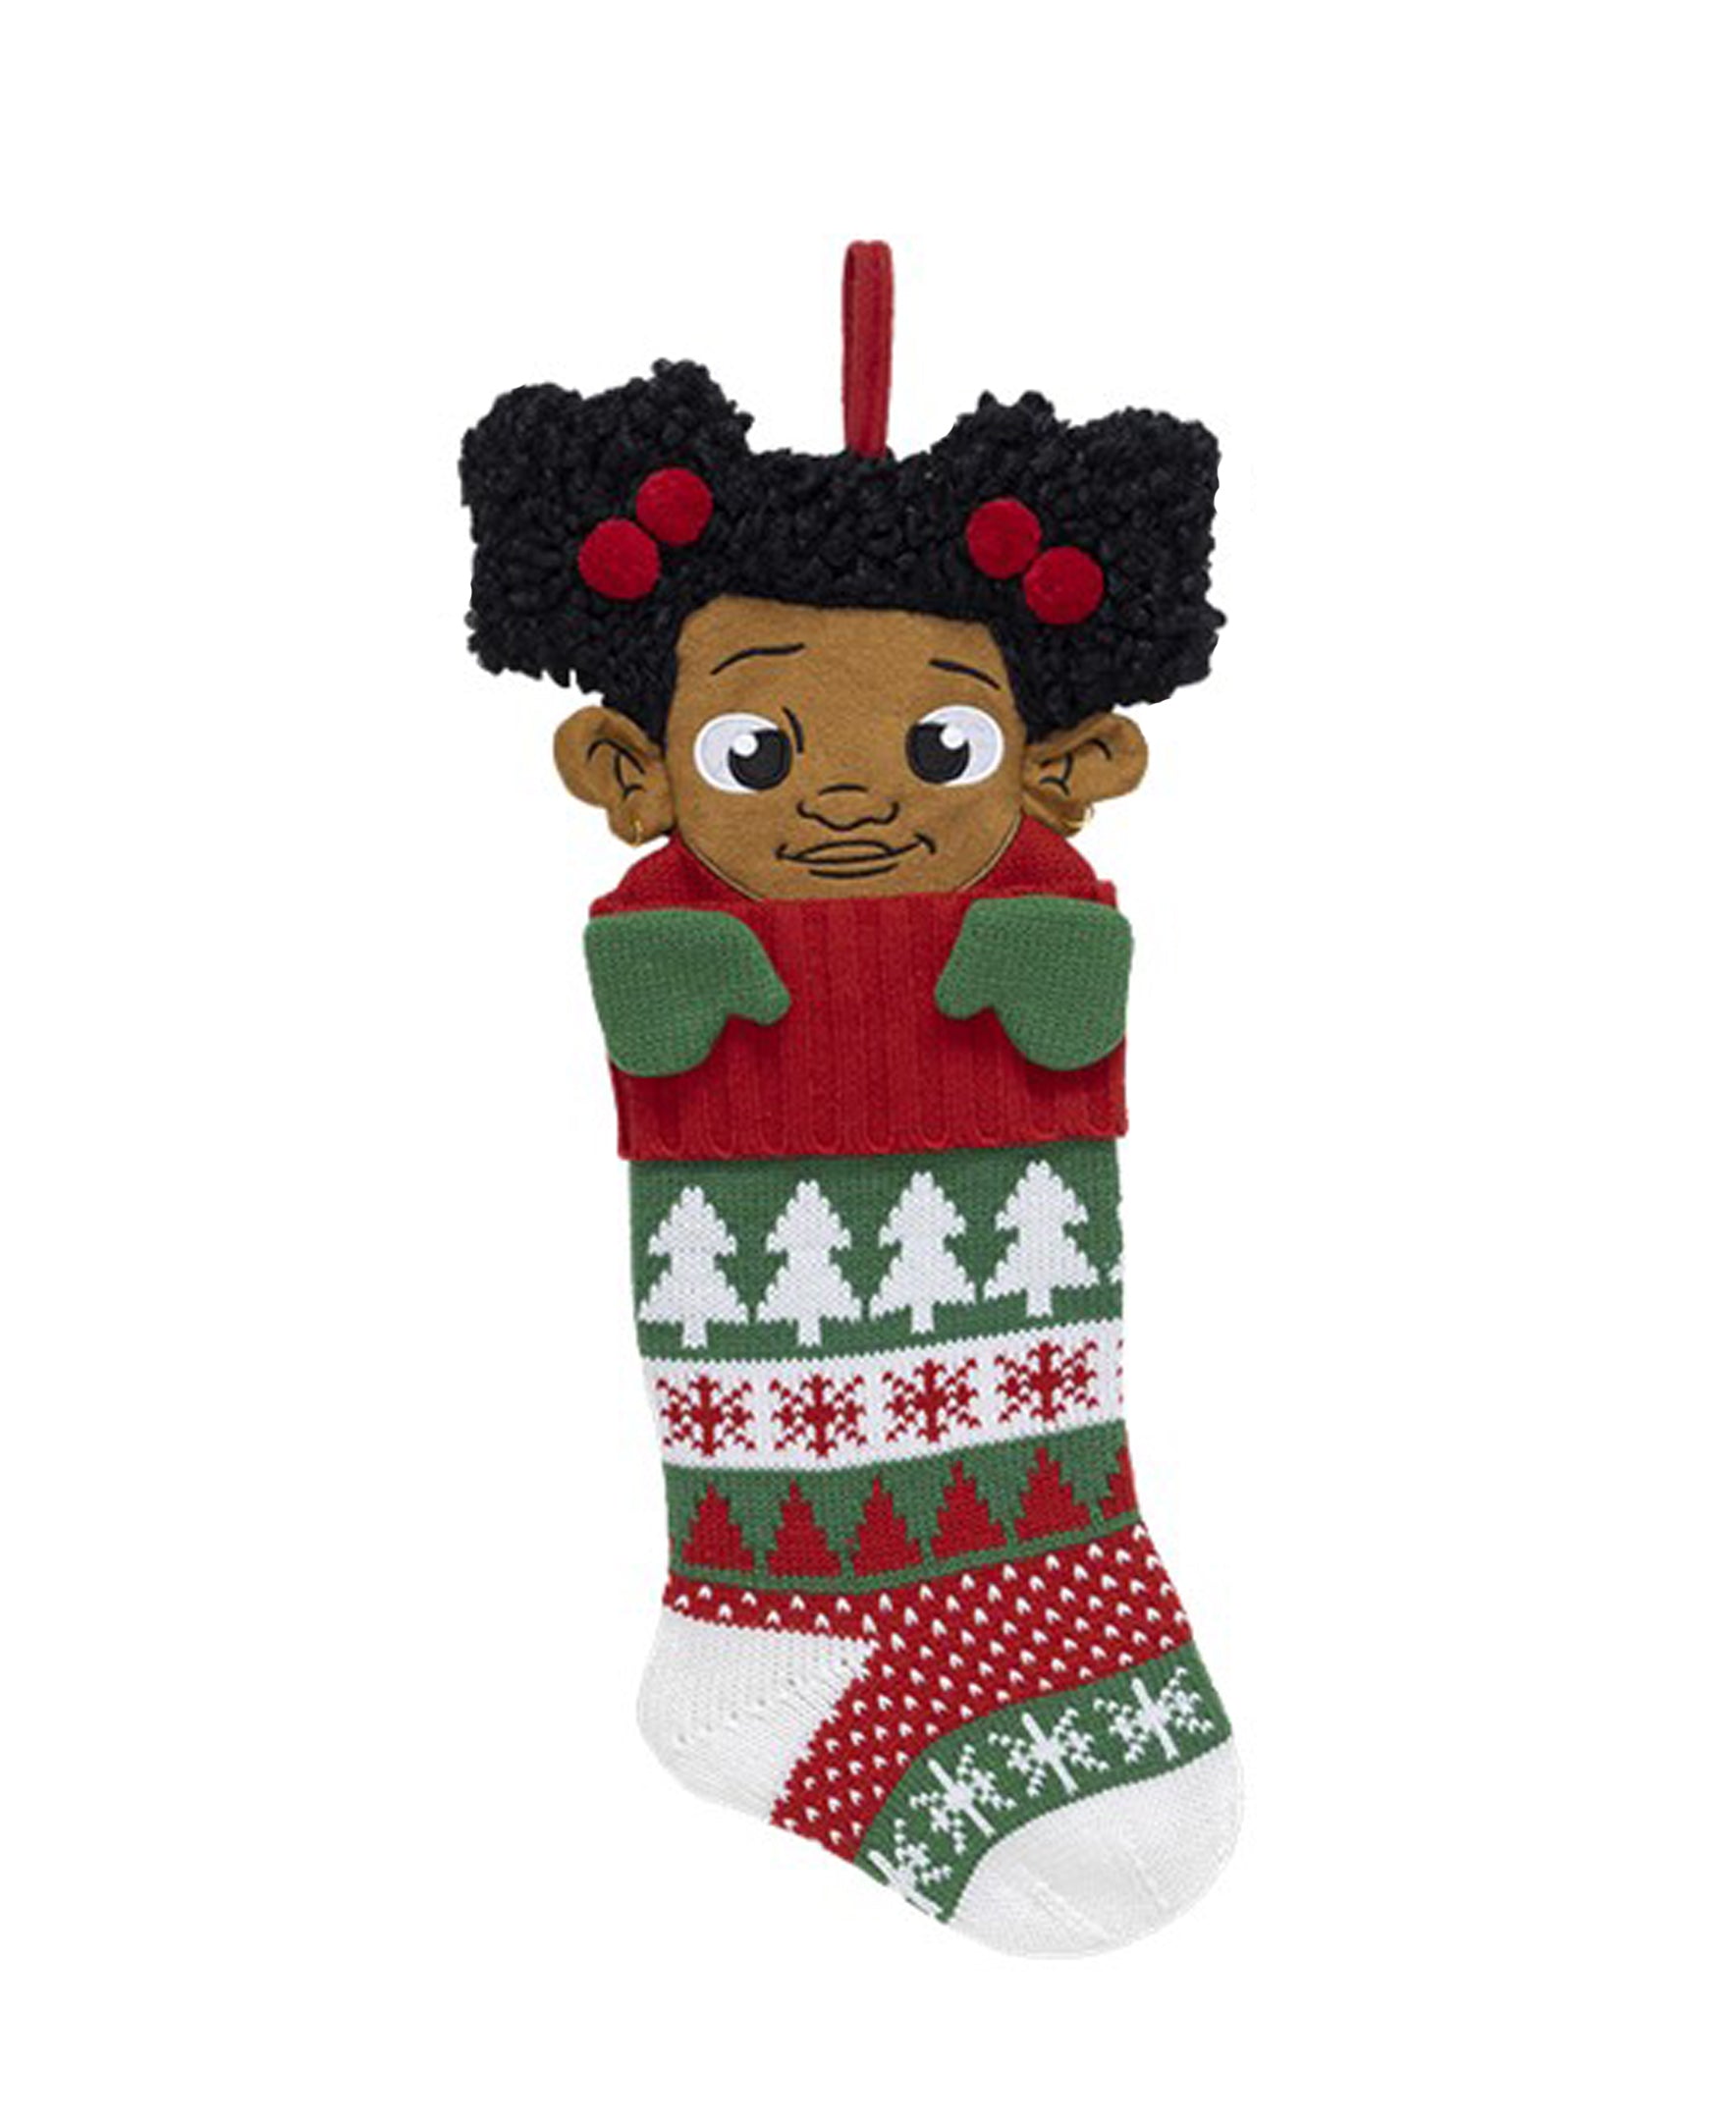 red, green and white Christmas themed matel stocking with a young black girl's face poking out. She's wearing afro puff pigtails